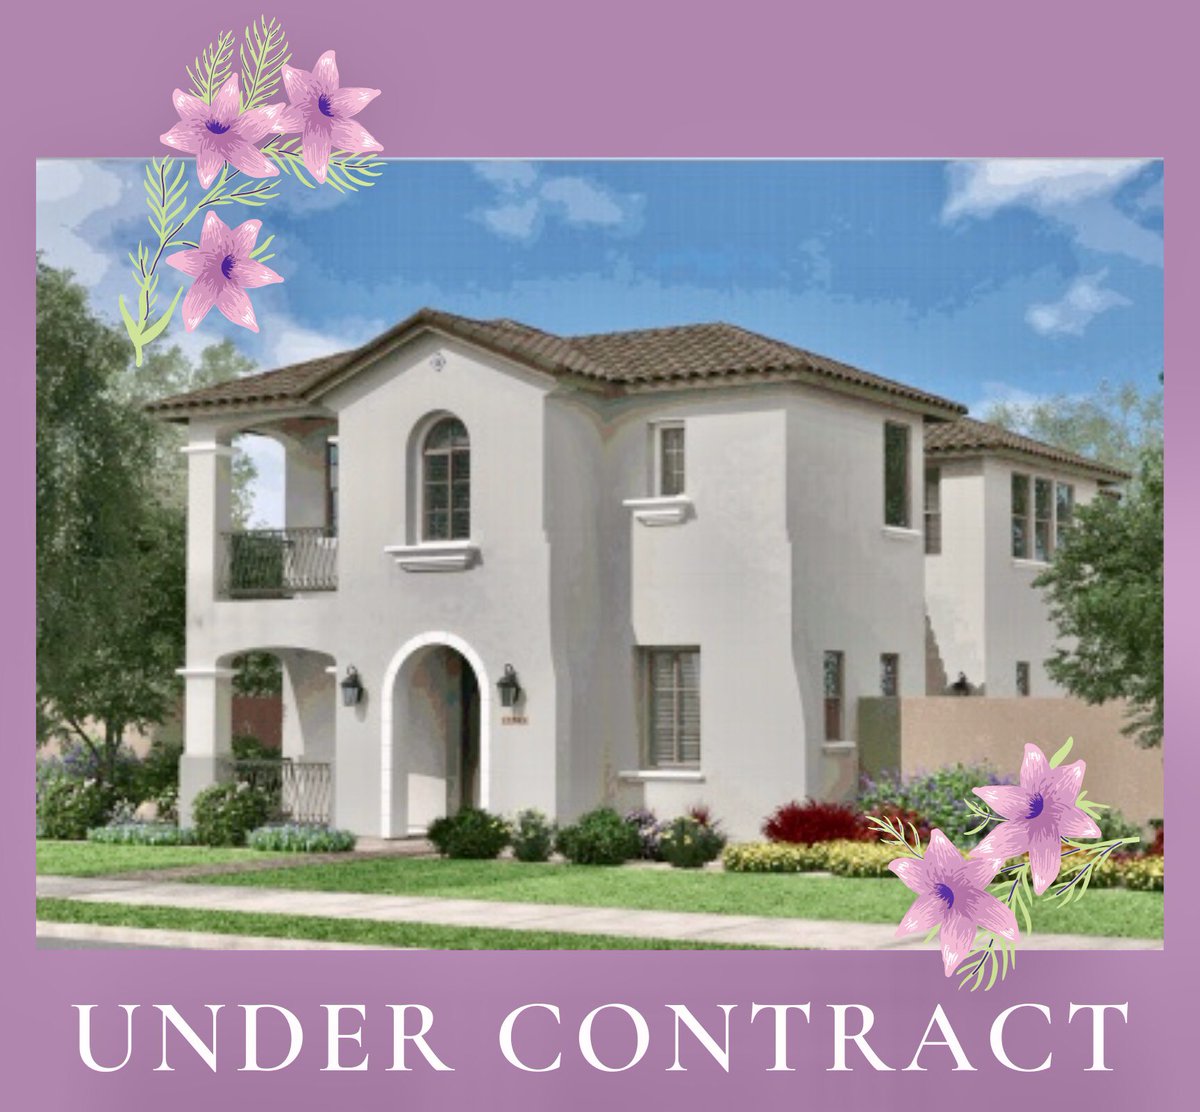 Under contract! This home is being built here in Gilbert, we are excited to see the progress 🏠 

#undercontract
#equalhousingcompany
#jamessansonteam
#kellerwilliamsrealtyphoenix
#seehomesinaz
#kwrp
#gilbertrealestate
#dreamhome
#nathanremington